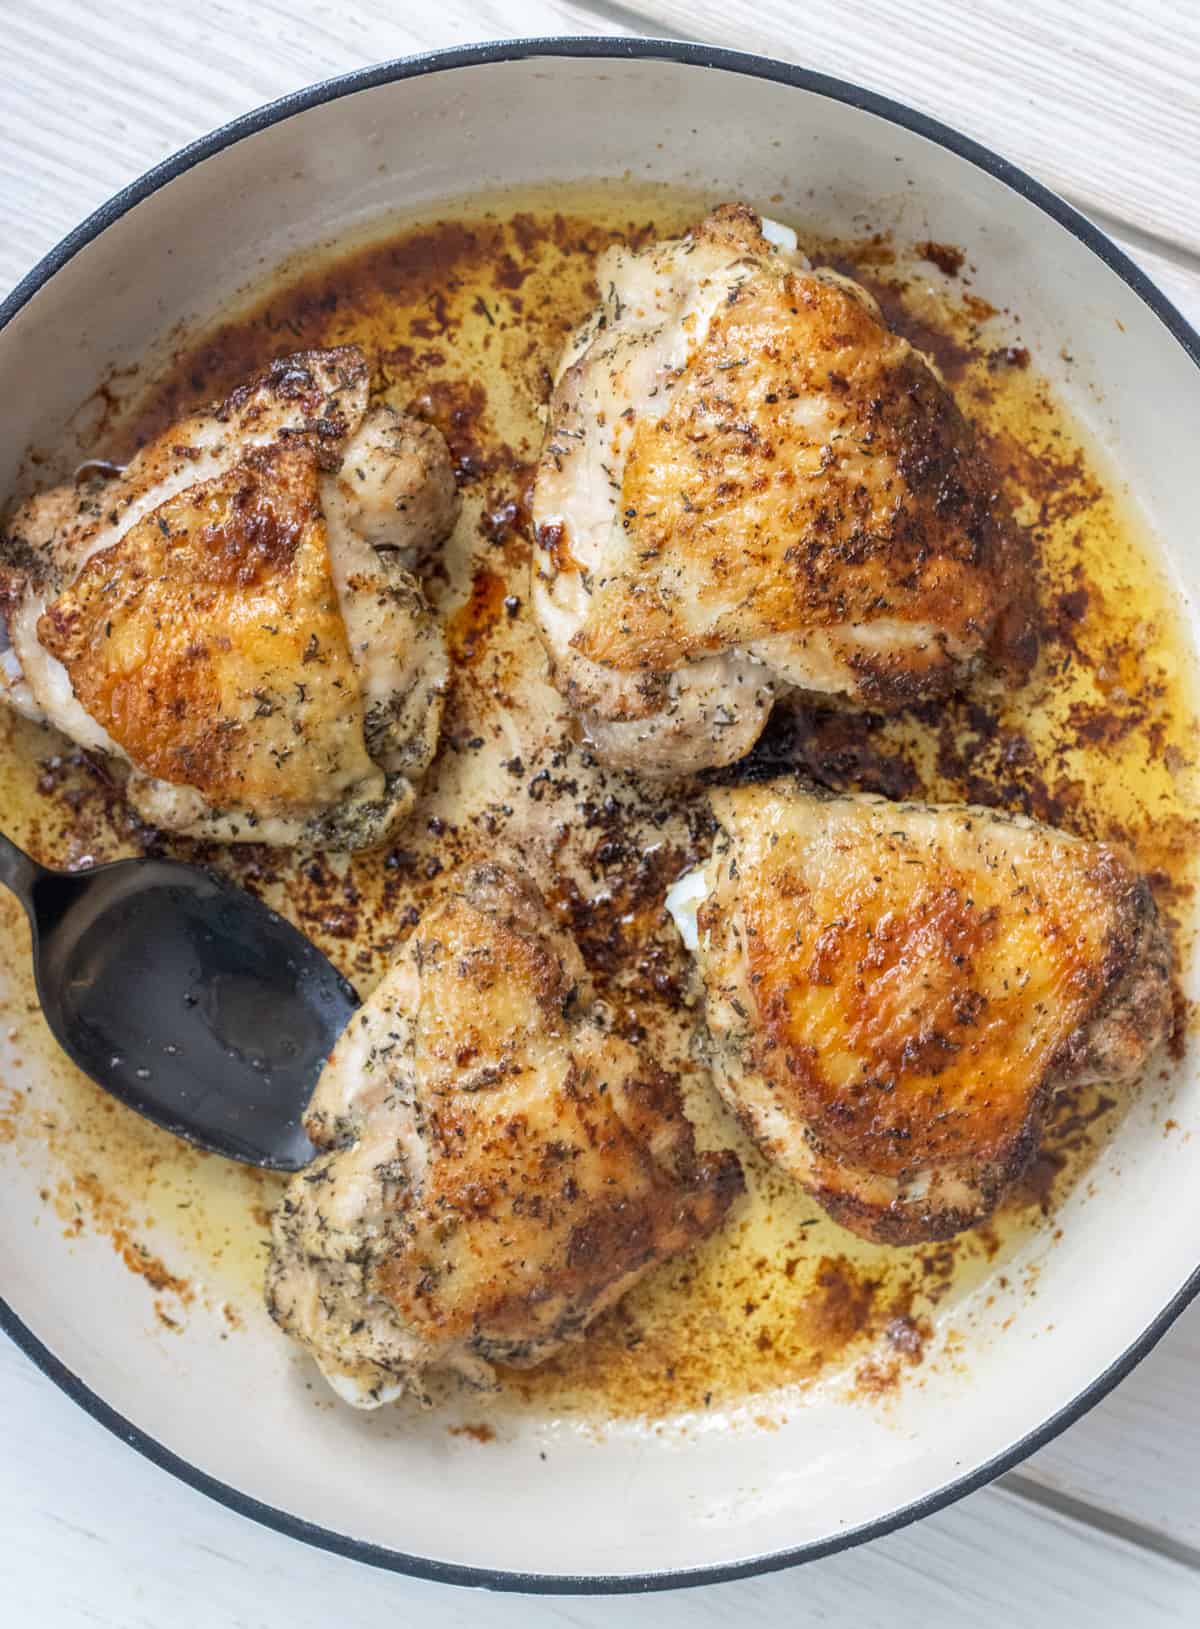 Four pan fried chicken thighs in the pan with a spoon.